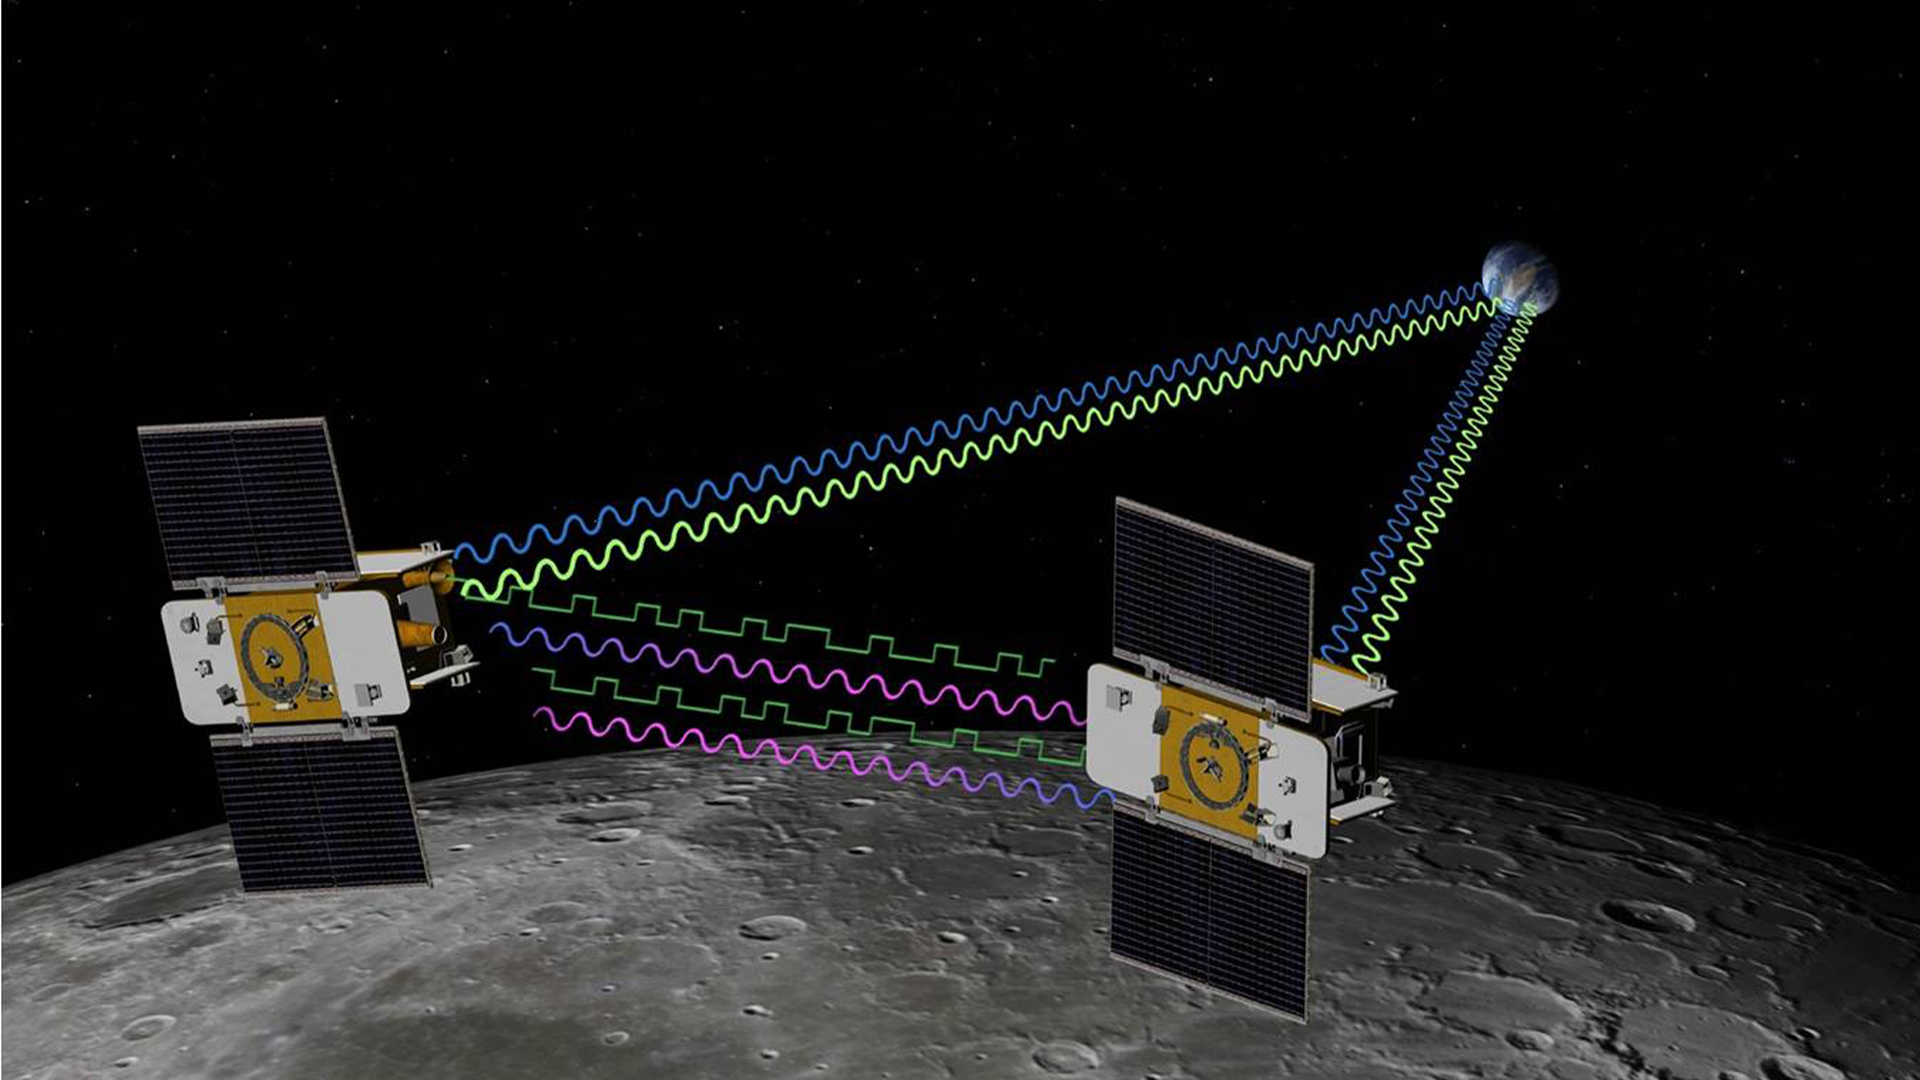 Artist's concept of NASA's Grail mission. Grail's twin spacecraft are flying in tandem orbits around the moon to measure its gravity field in unprecedented detail.